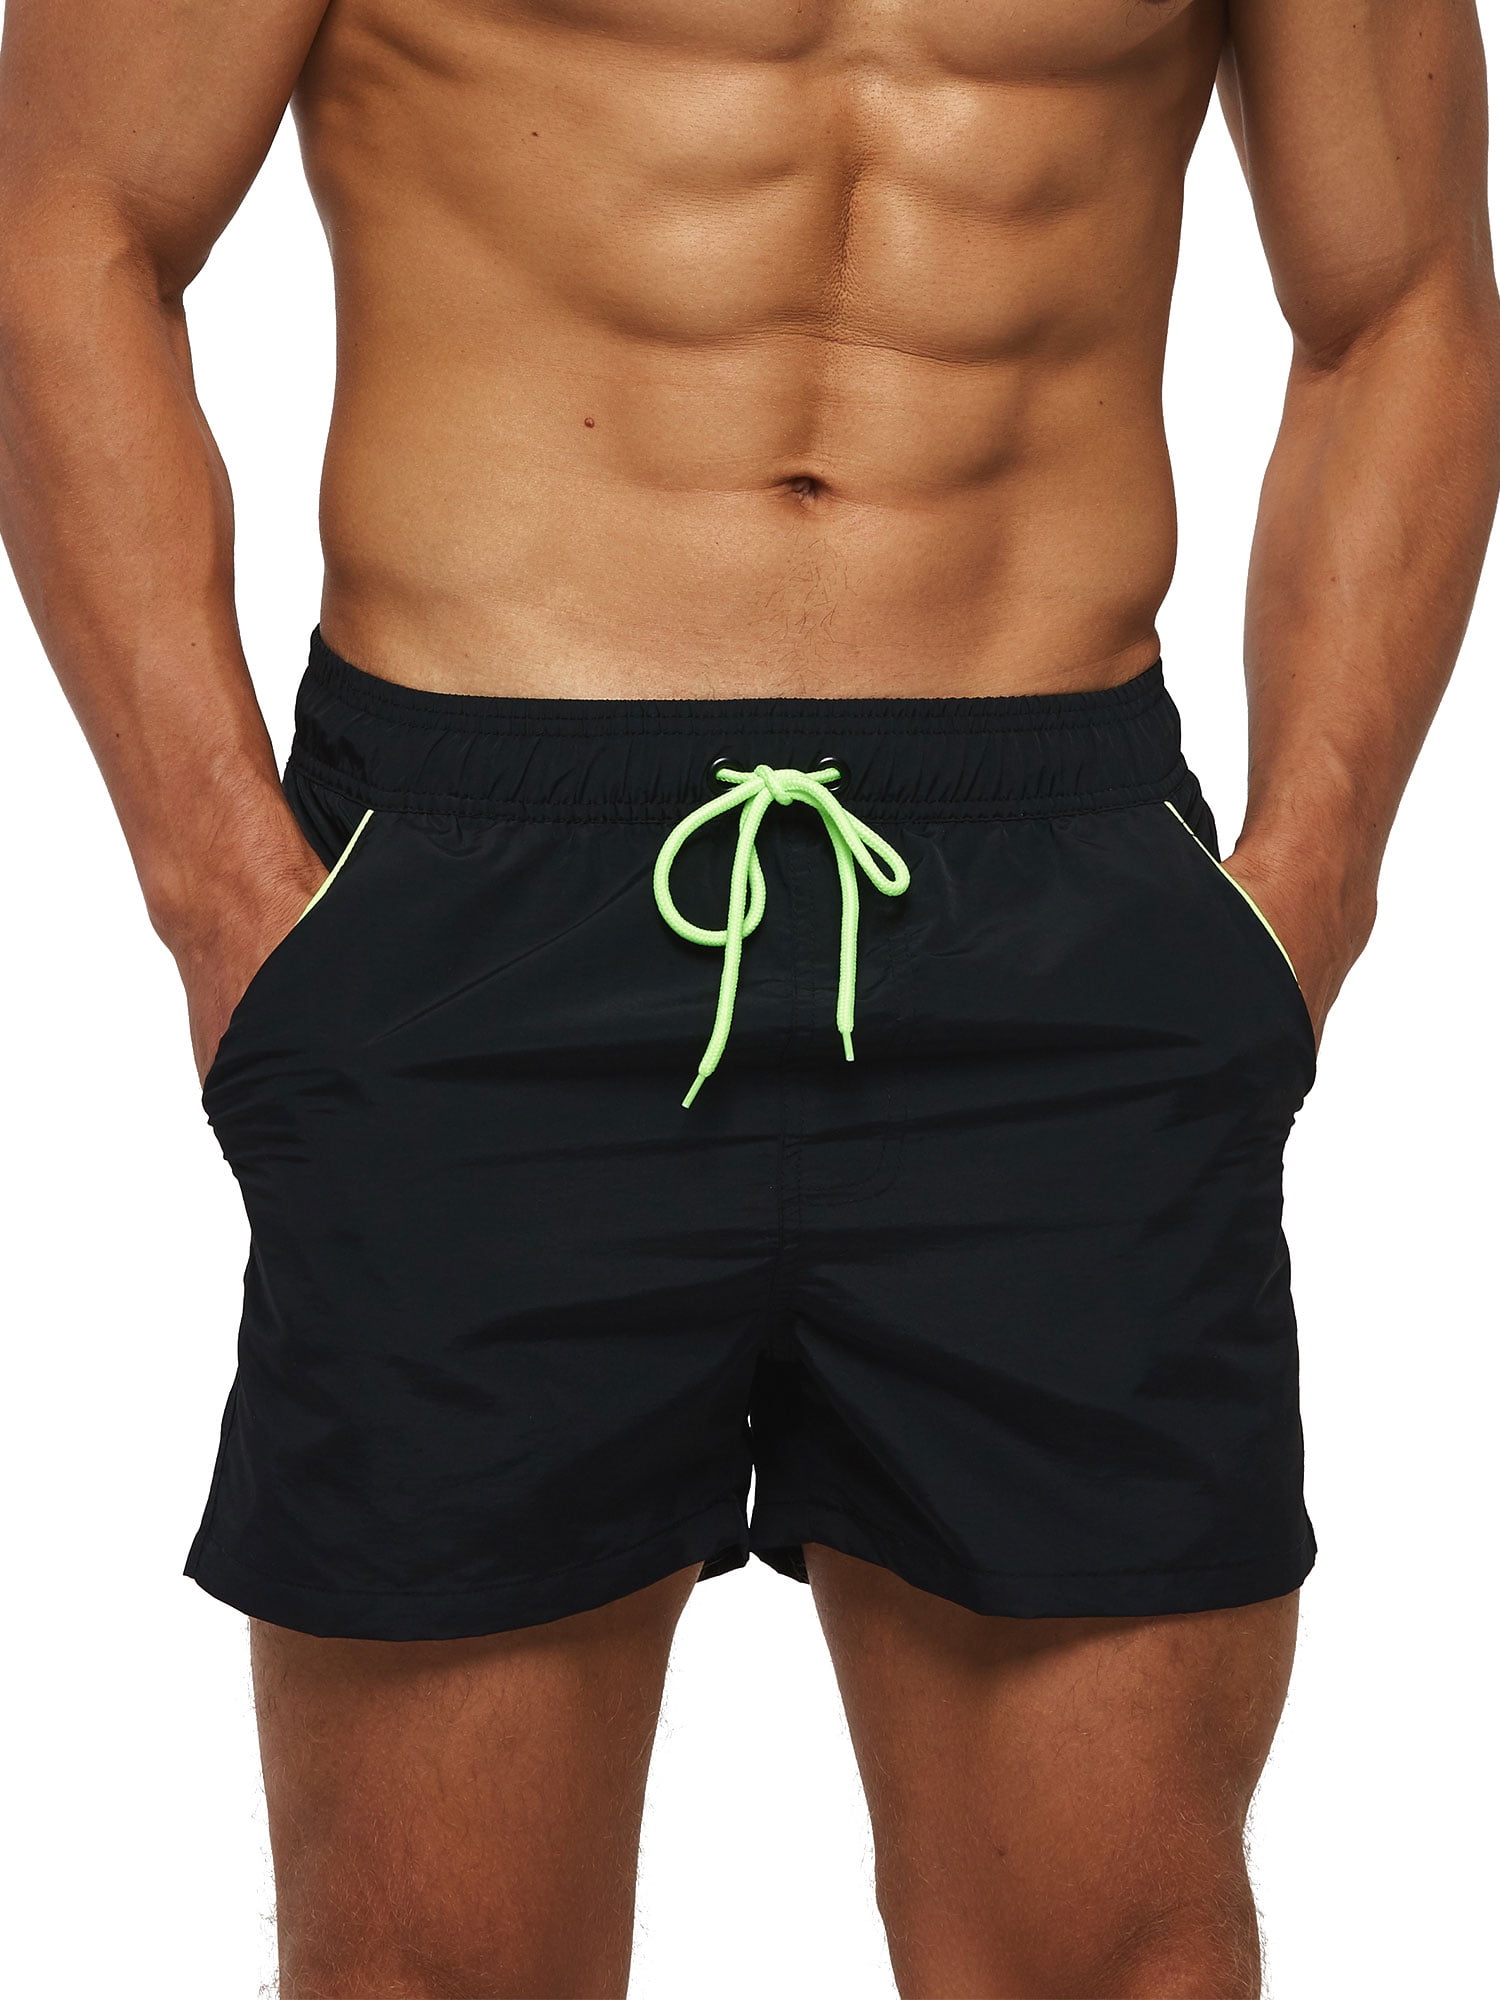 Mens Beach Shorts Love Summer Casual Quick Dry Short Pants Stretch Swimming Trunks with Pocket